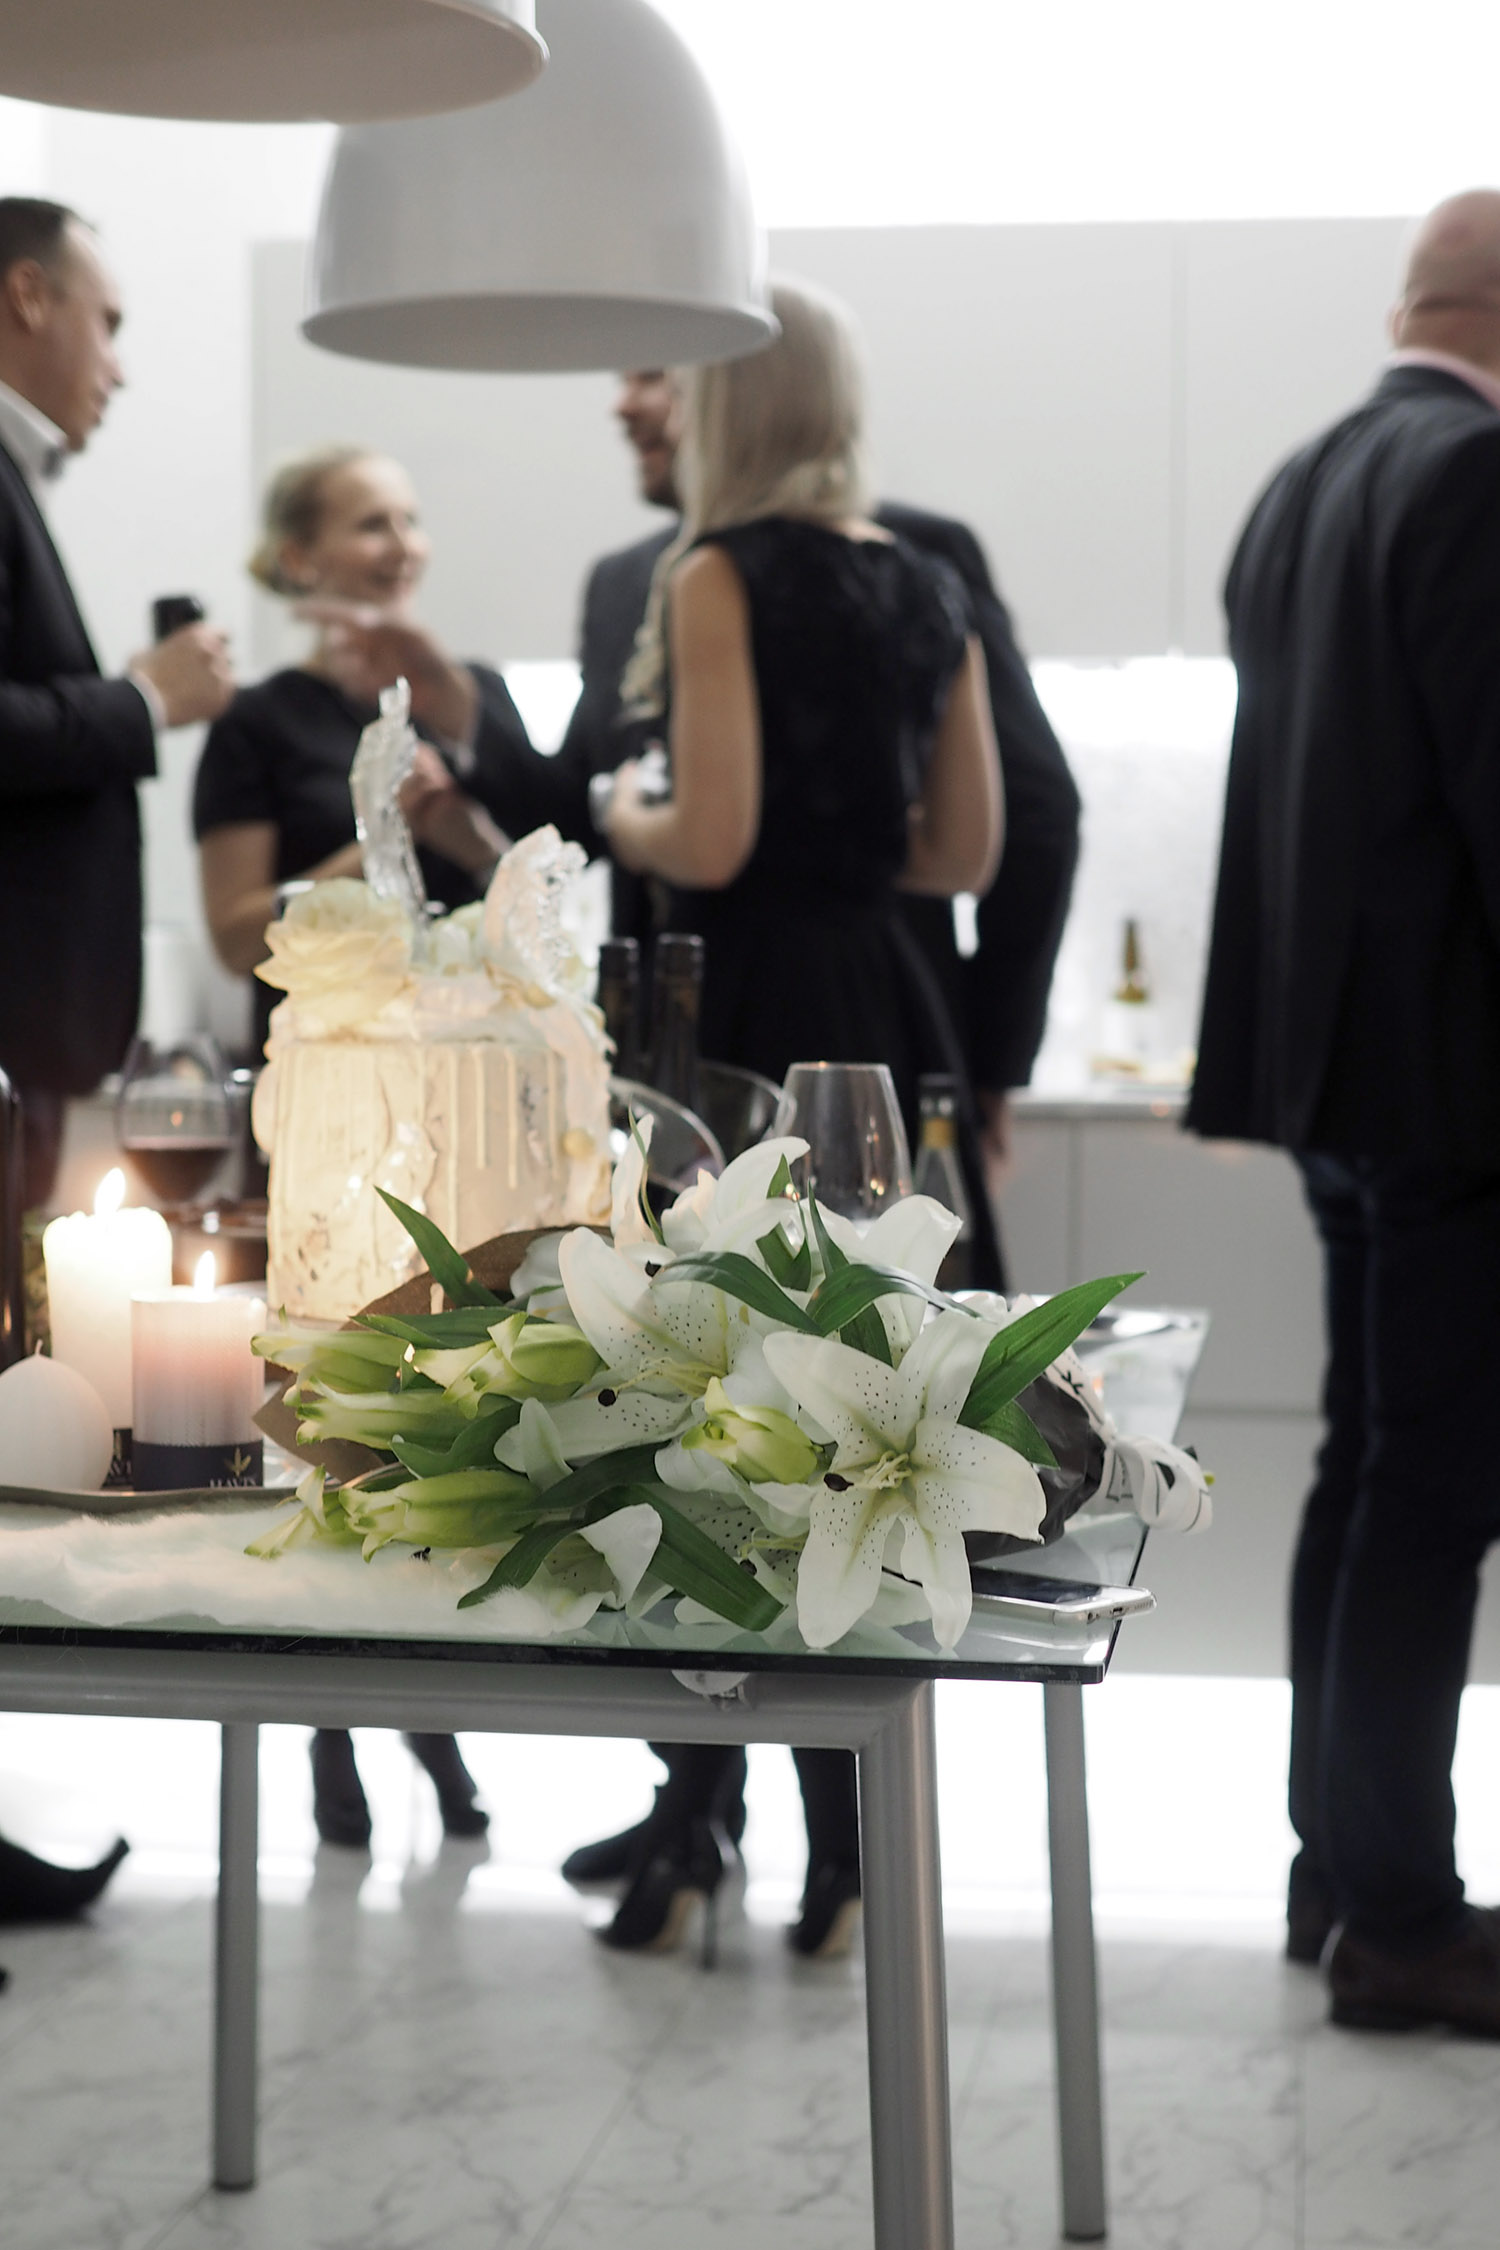 C and the city - The most stylish birthdayparty - champagne, lilies and cake! - more pics and ideas on the blog: //www.idealista.fi/charandthecity/2016/11/27/talven-tyylikkaimmat-juhlat